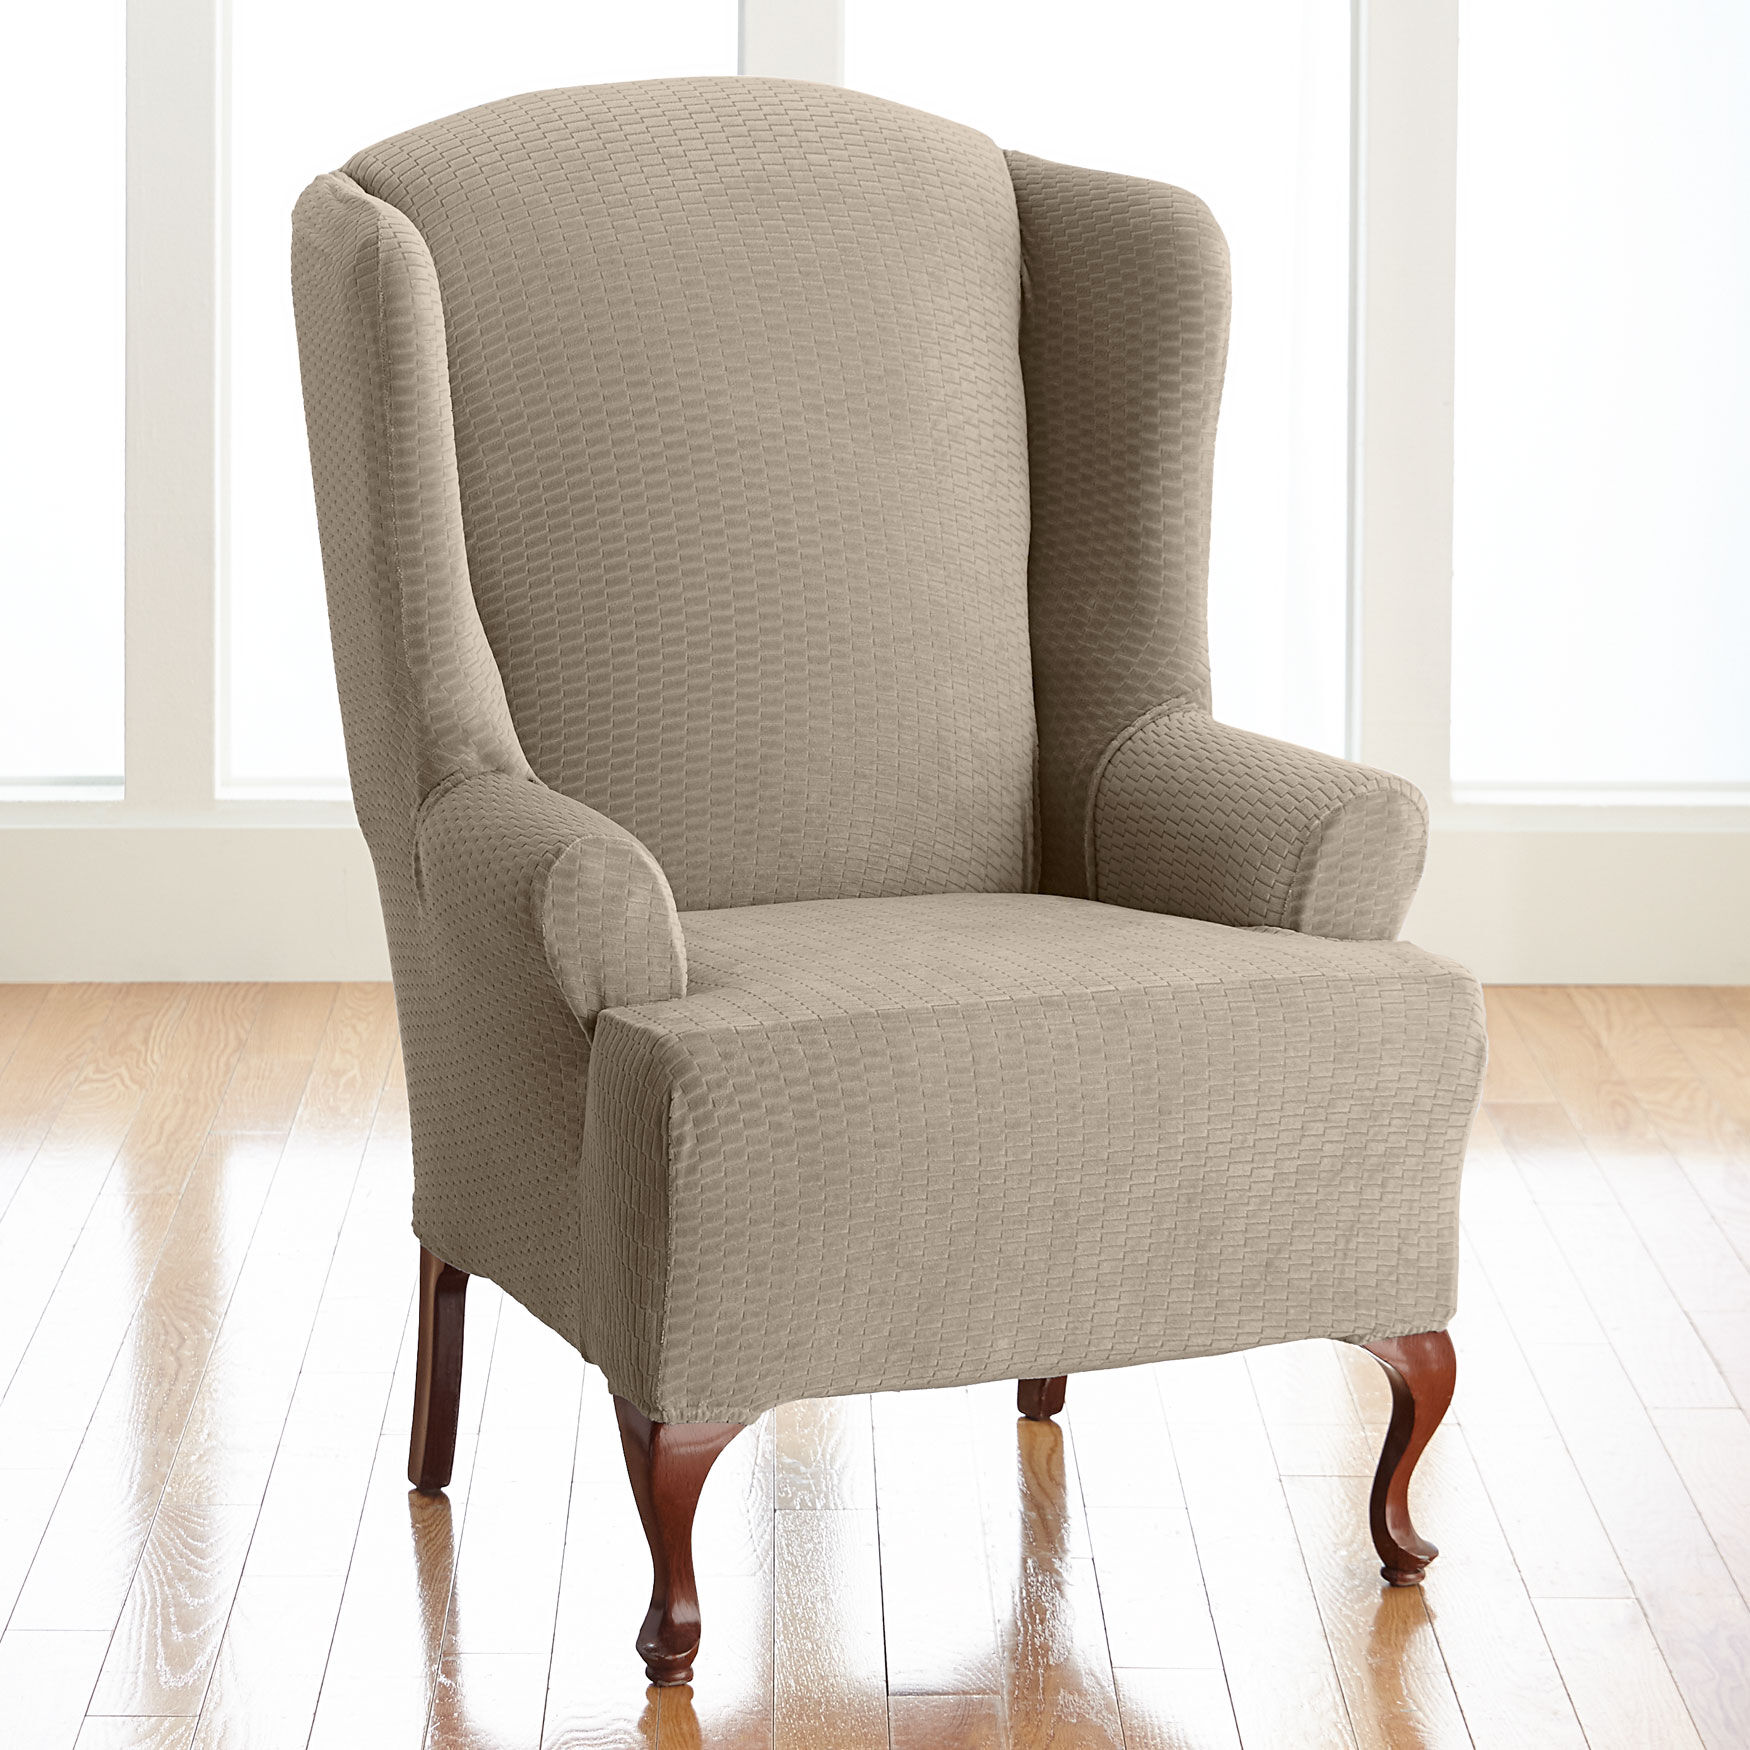 Brylanehome Bh Studio Brighton Stretch Wing Chair Slipcover, Stone - image 1 of 1